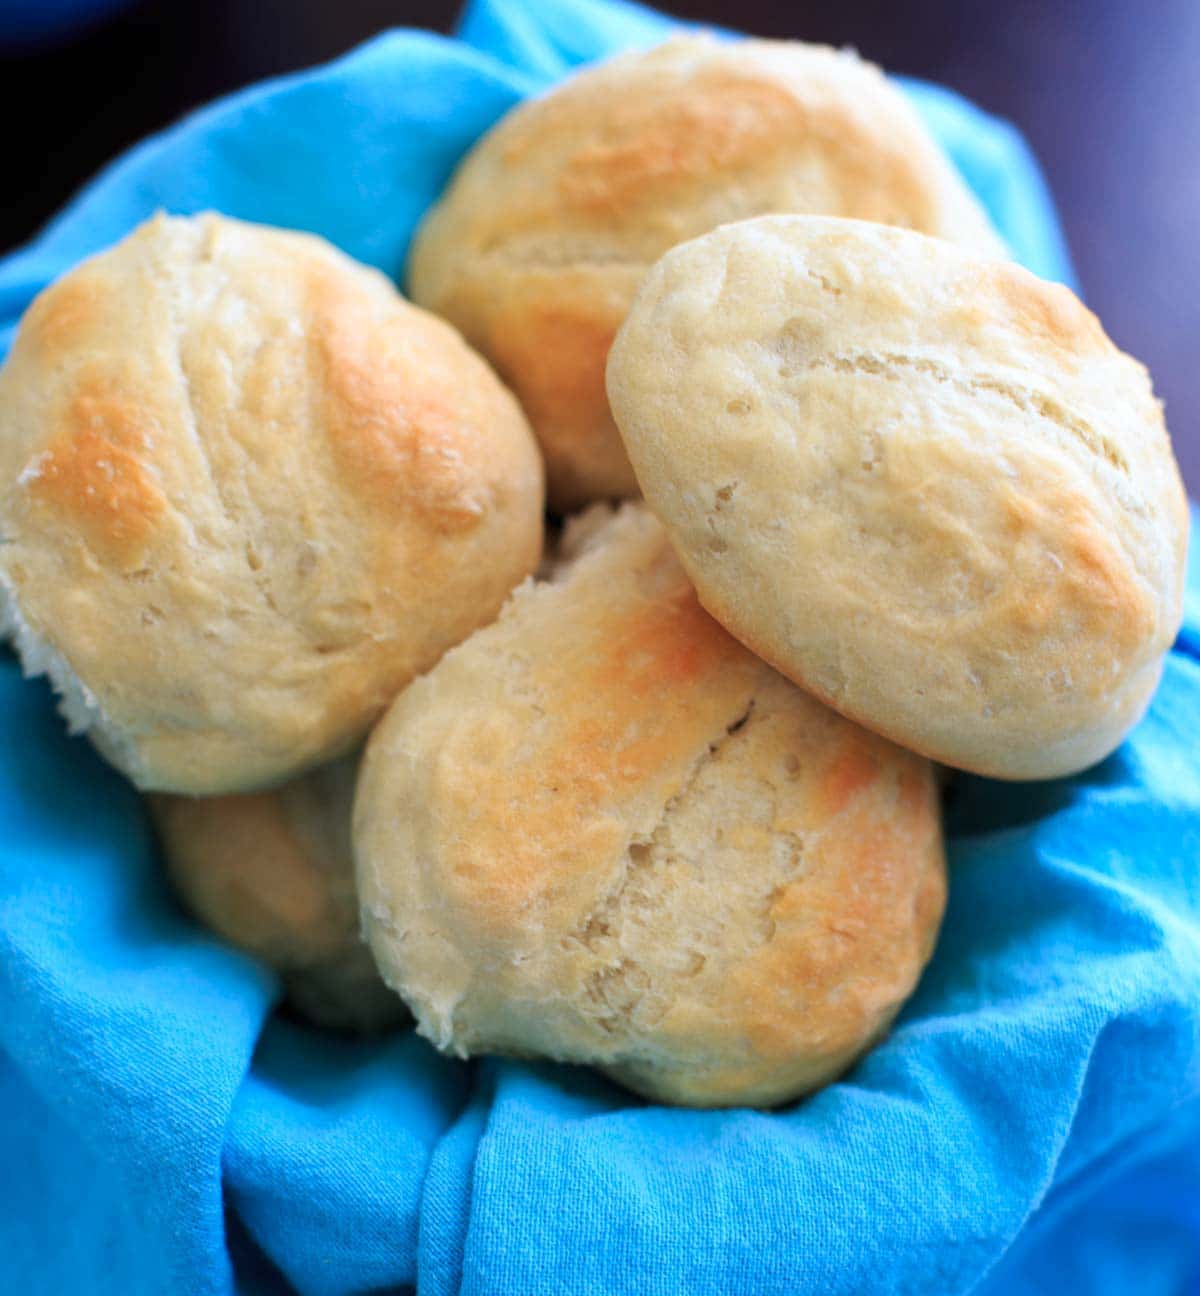 Mexican Bolillo Dinner Rolls - a mini baguette with a crunchy crust and a soft center.